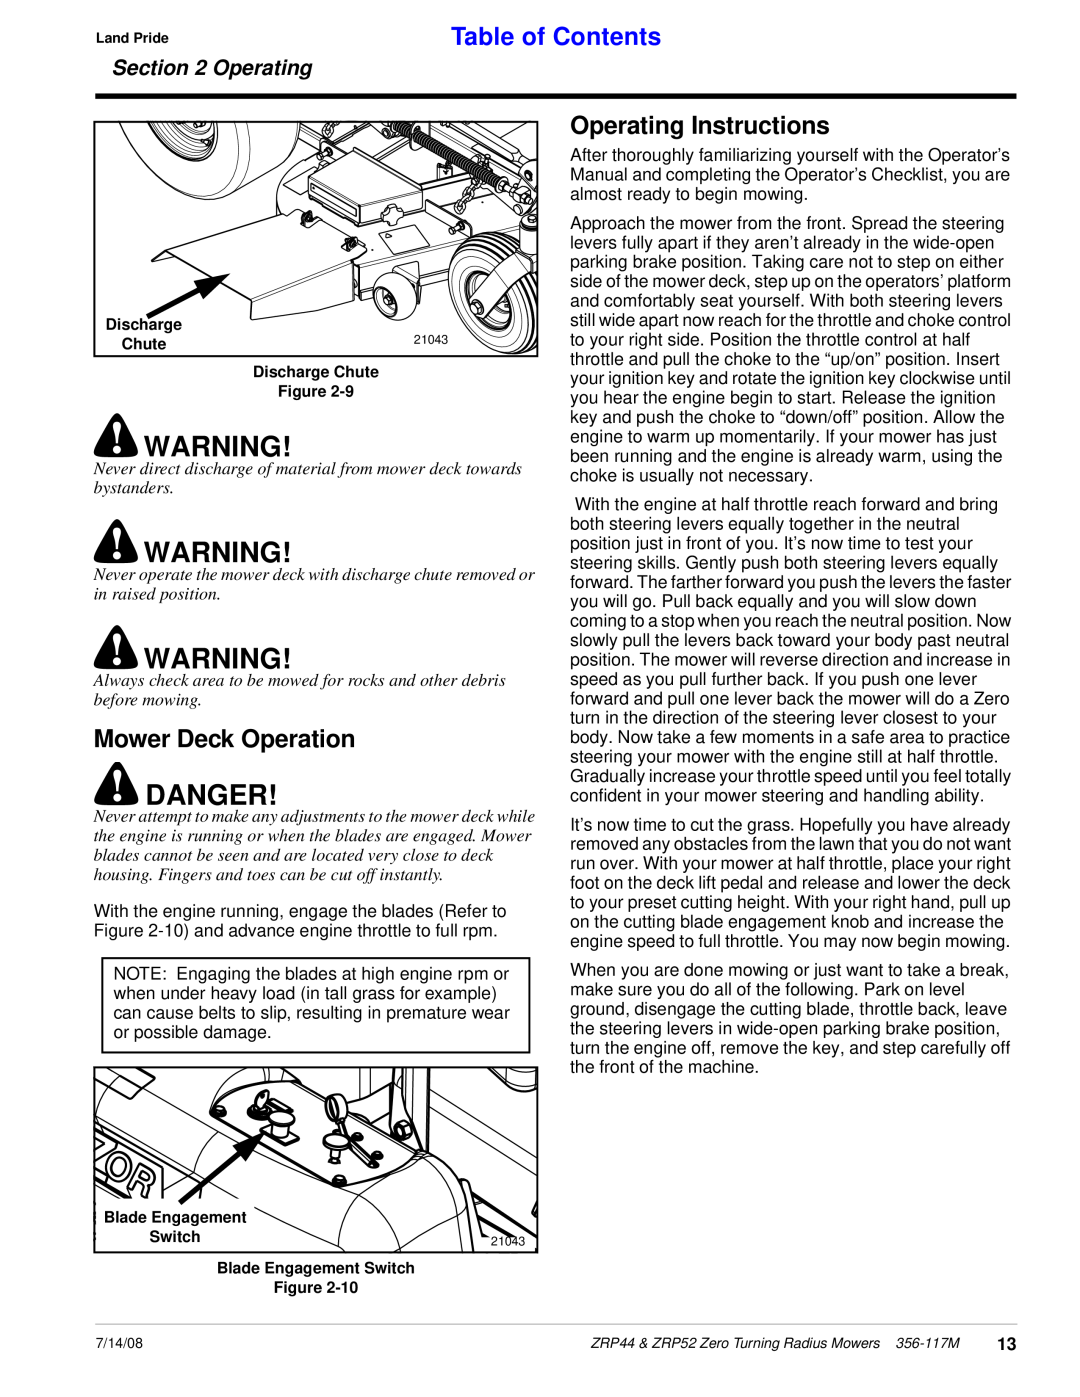 Land Pride ZRP44, ZRP52 manual Mower Deck Operation, Operating Instructions, Danger, Table of Contents 